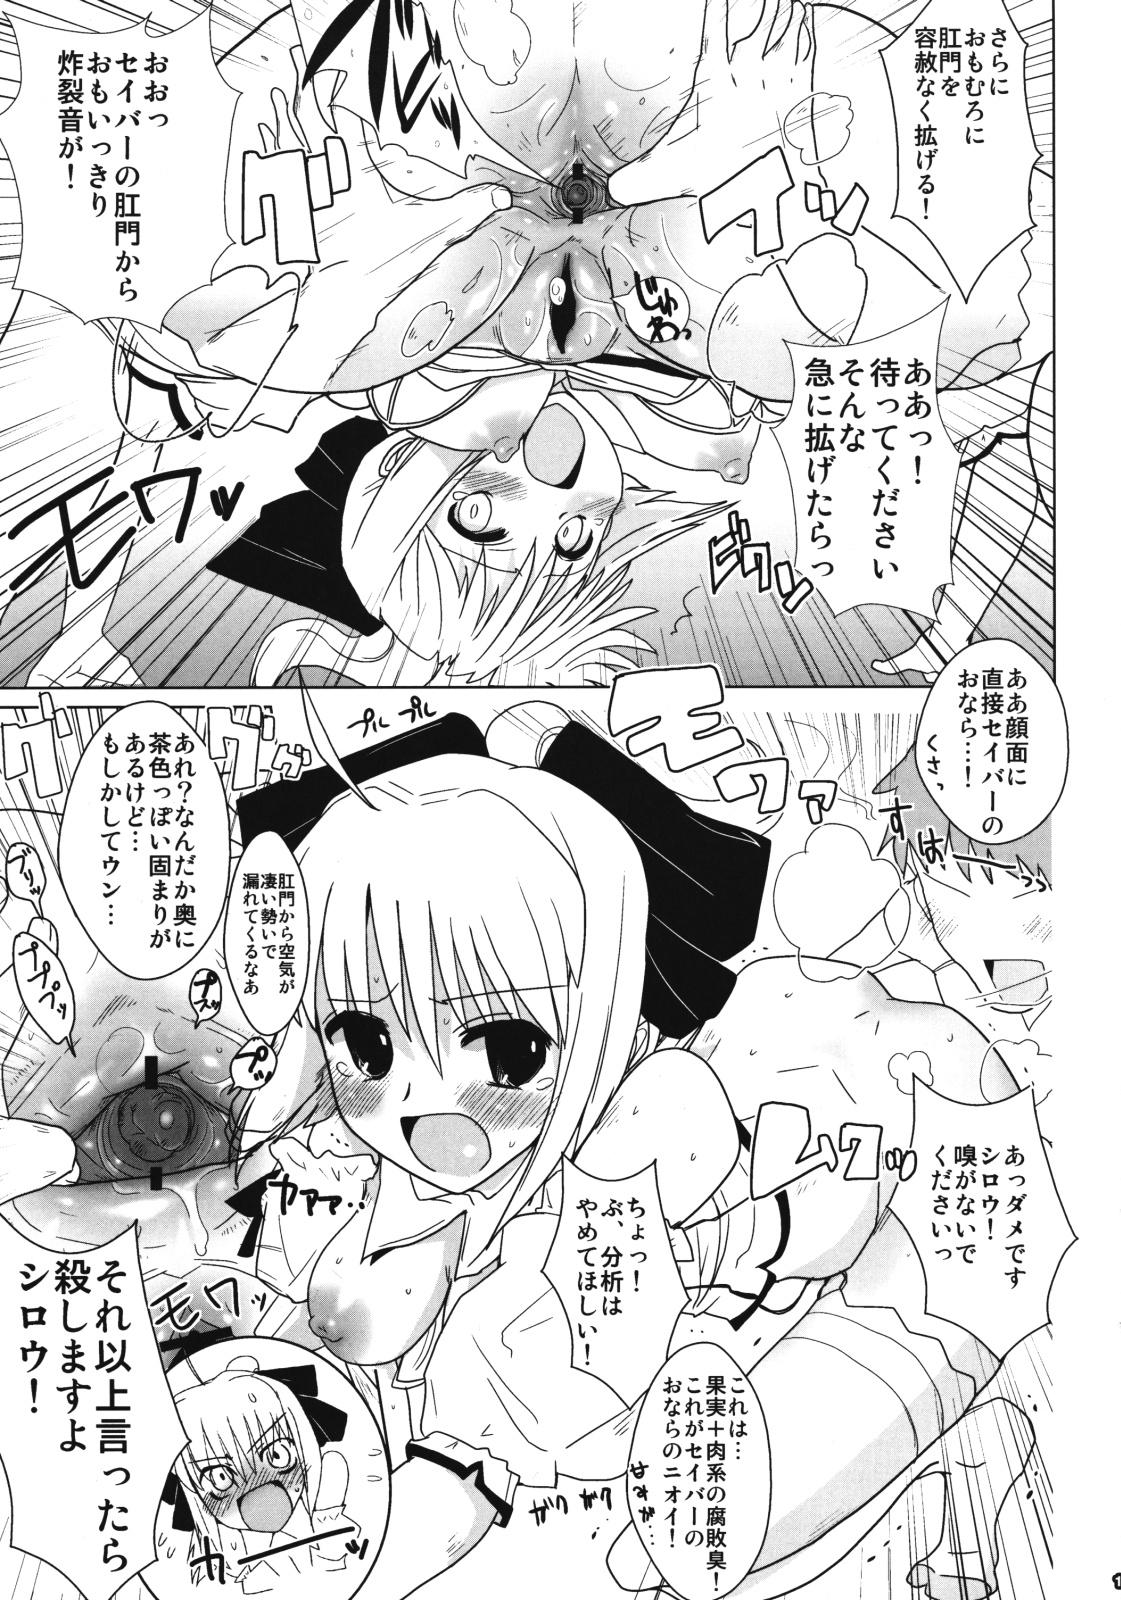 Vagina Lily Holic no Subete - Fate stay night Staxxx - Page 12